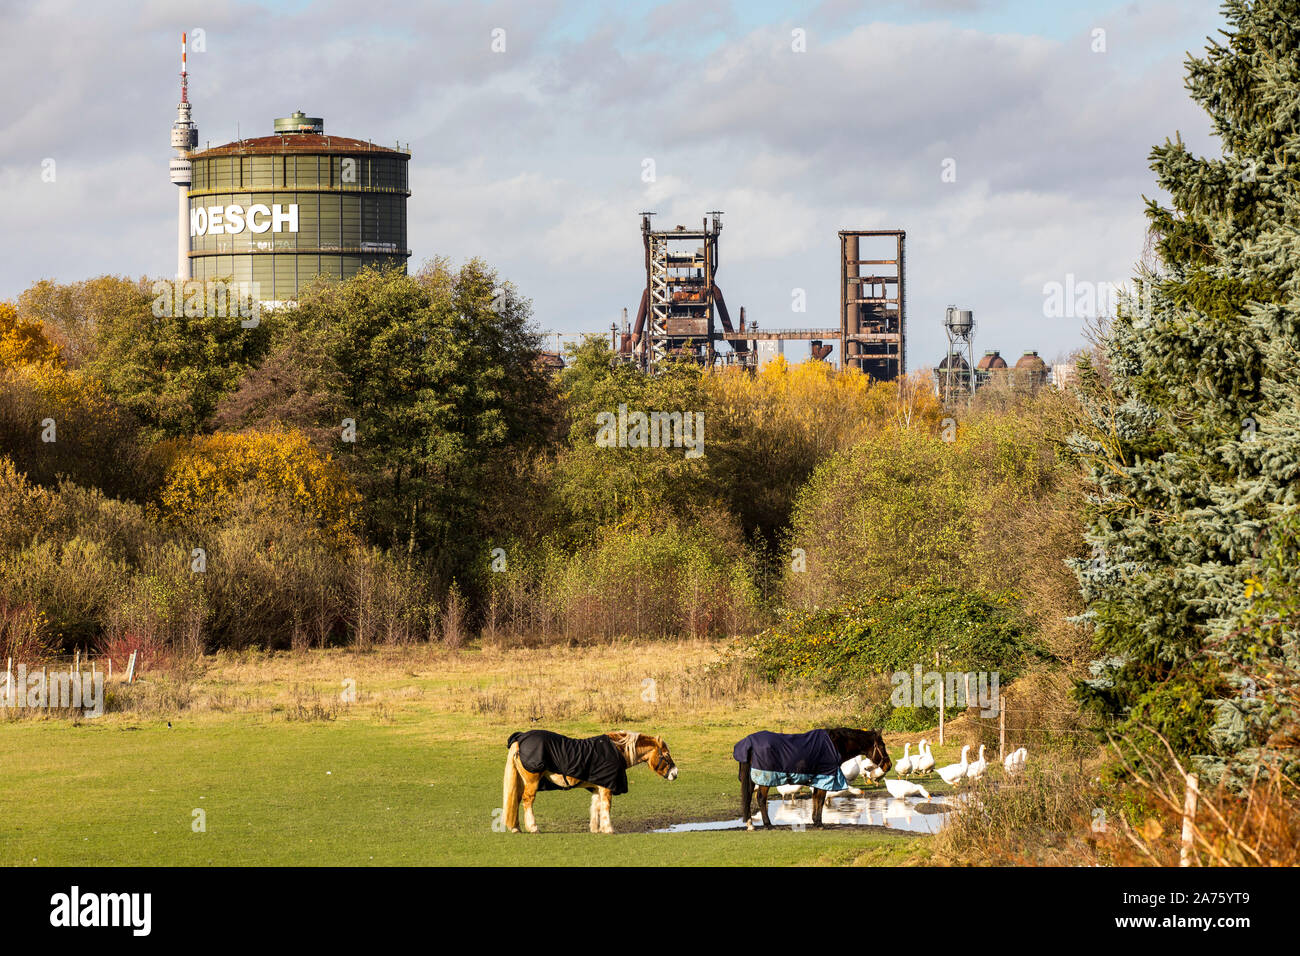 View from Dortmund-Hörde, Pferdekoppel, onto the former Hoesch steelworks, Phoenix-West, gasometer, blast furnaces, Florian tower at the back left, te Stock Photo